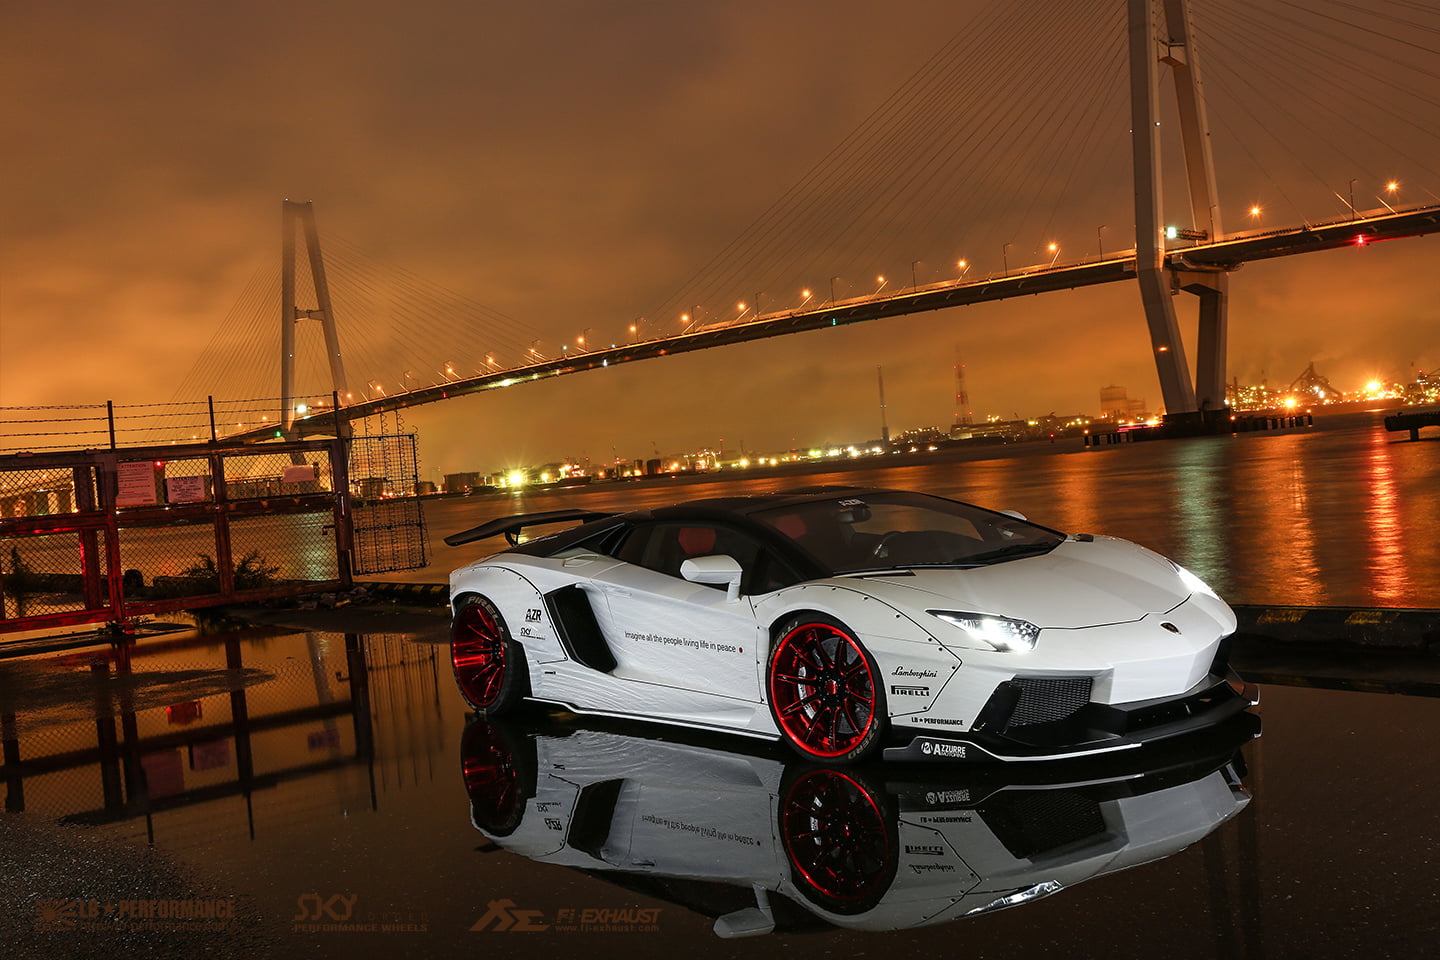 landscape photography of sports car near body of water and bridge